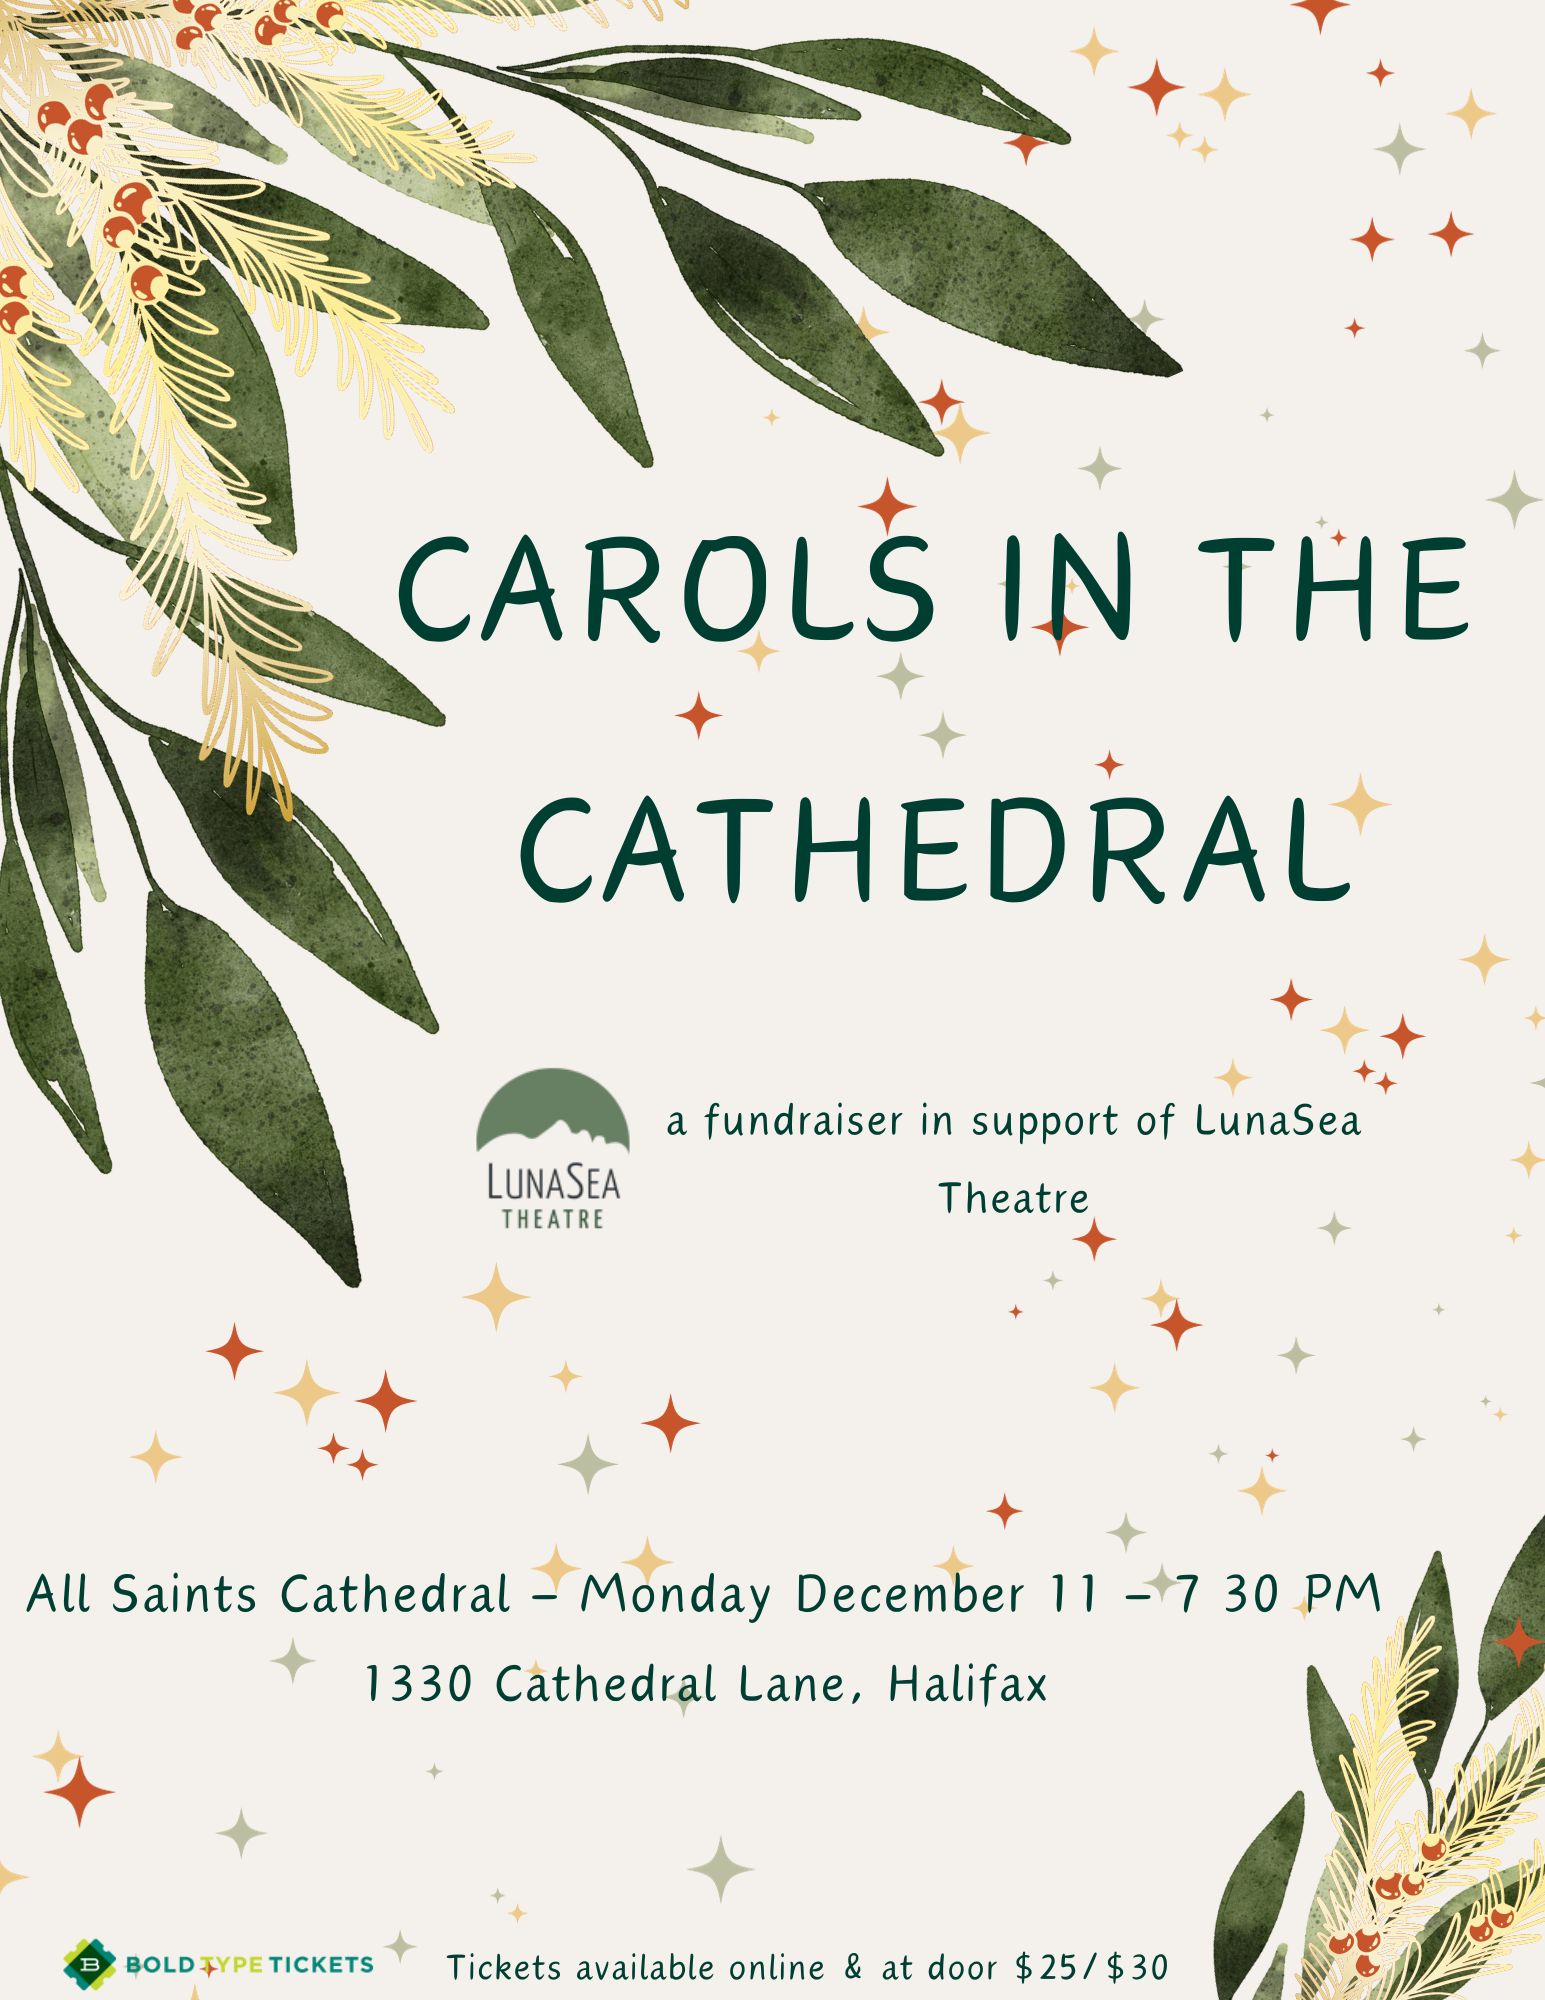 CAROLS IN the cathedral